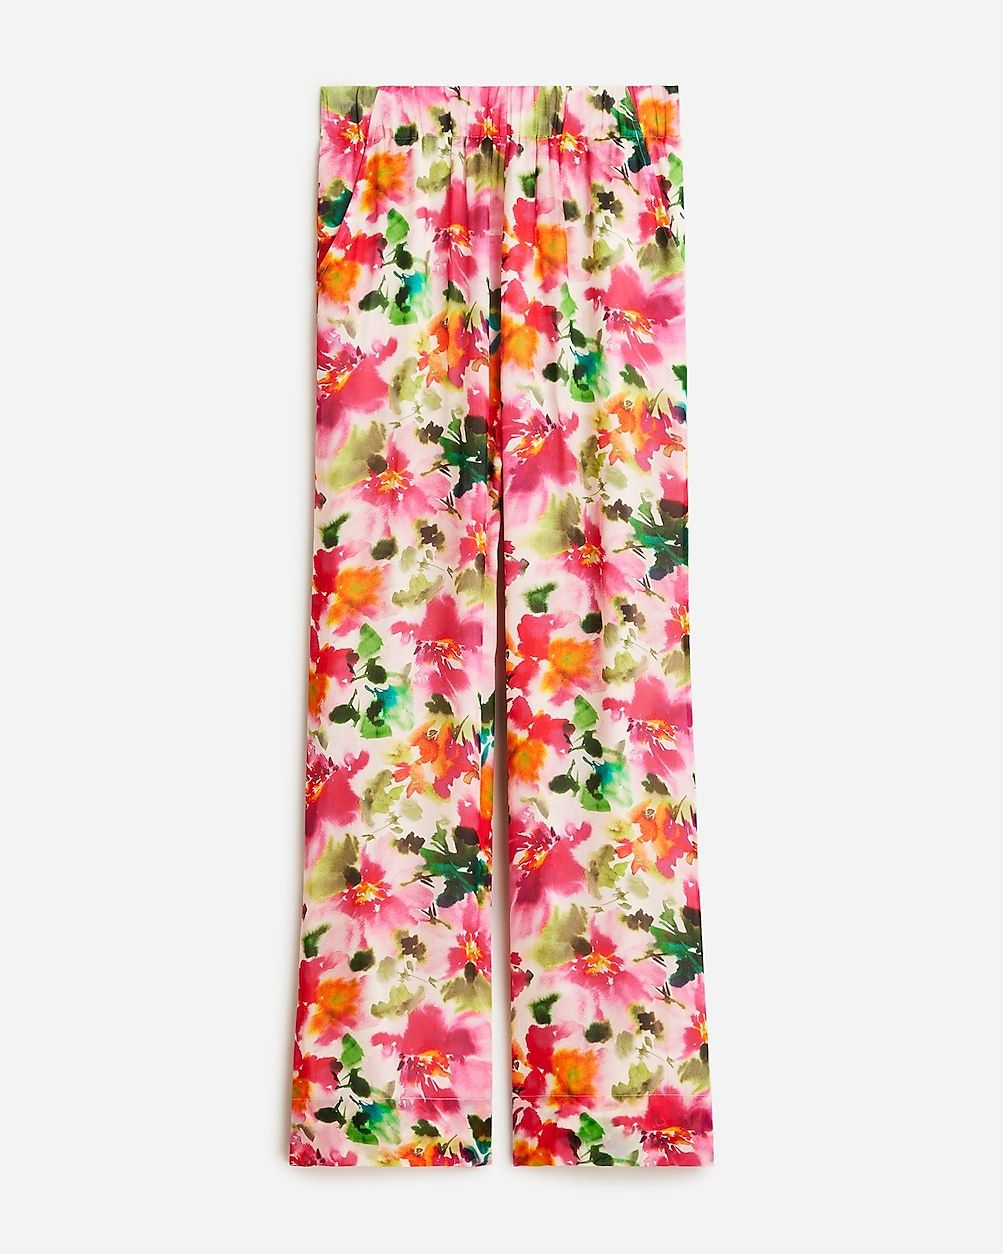 Full-length Astrid pant in floral chiffon | J.Crew US